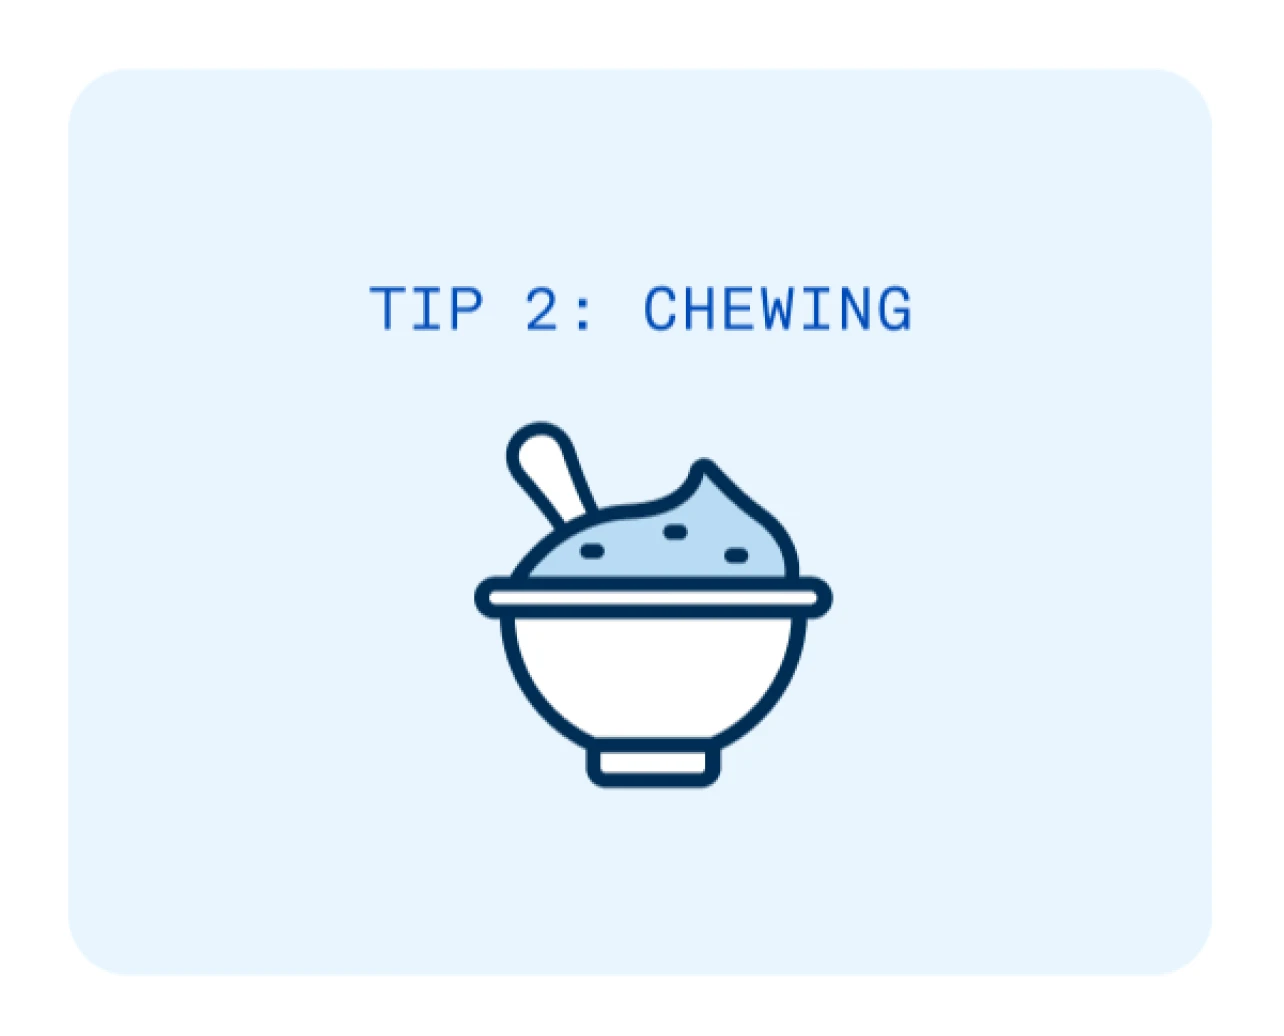 Chewing icon